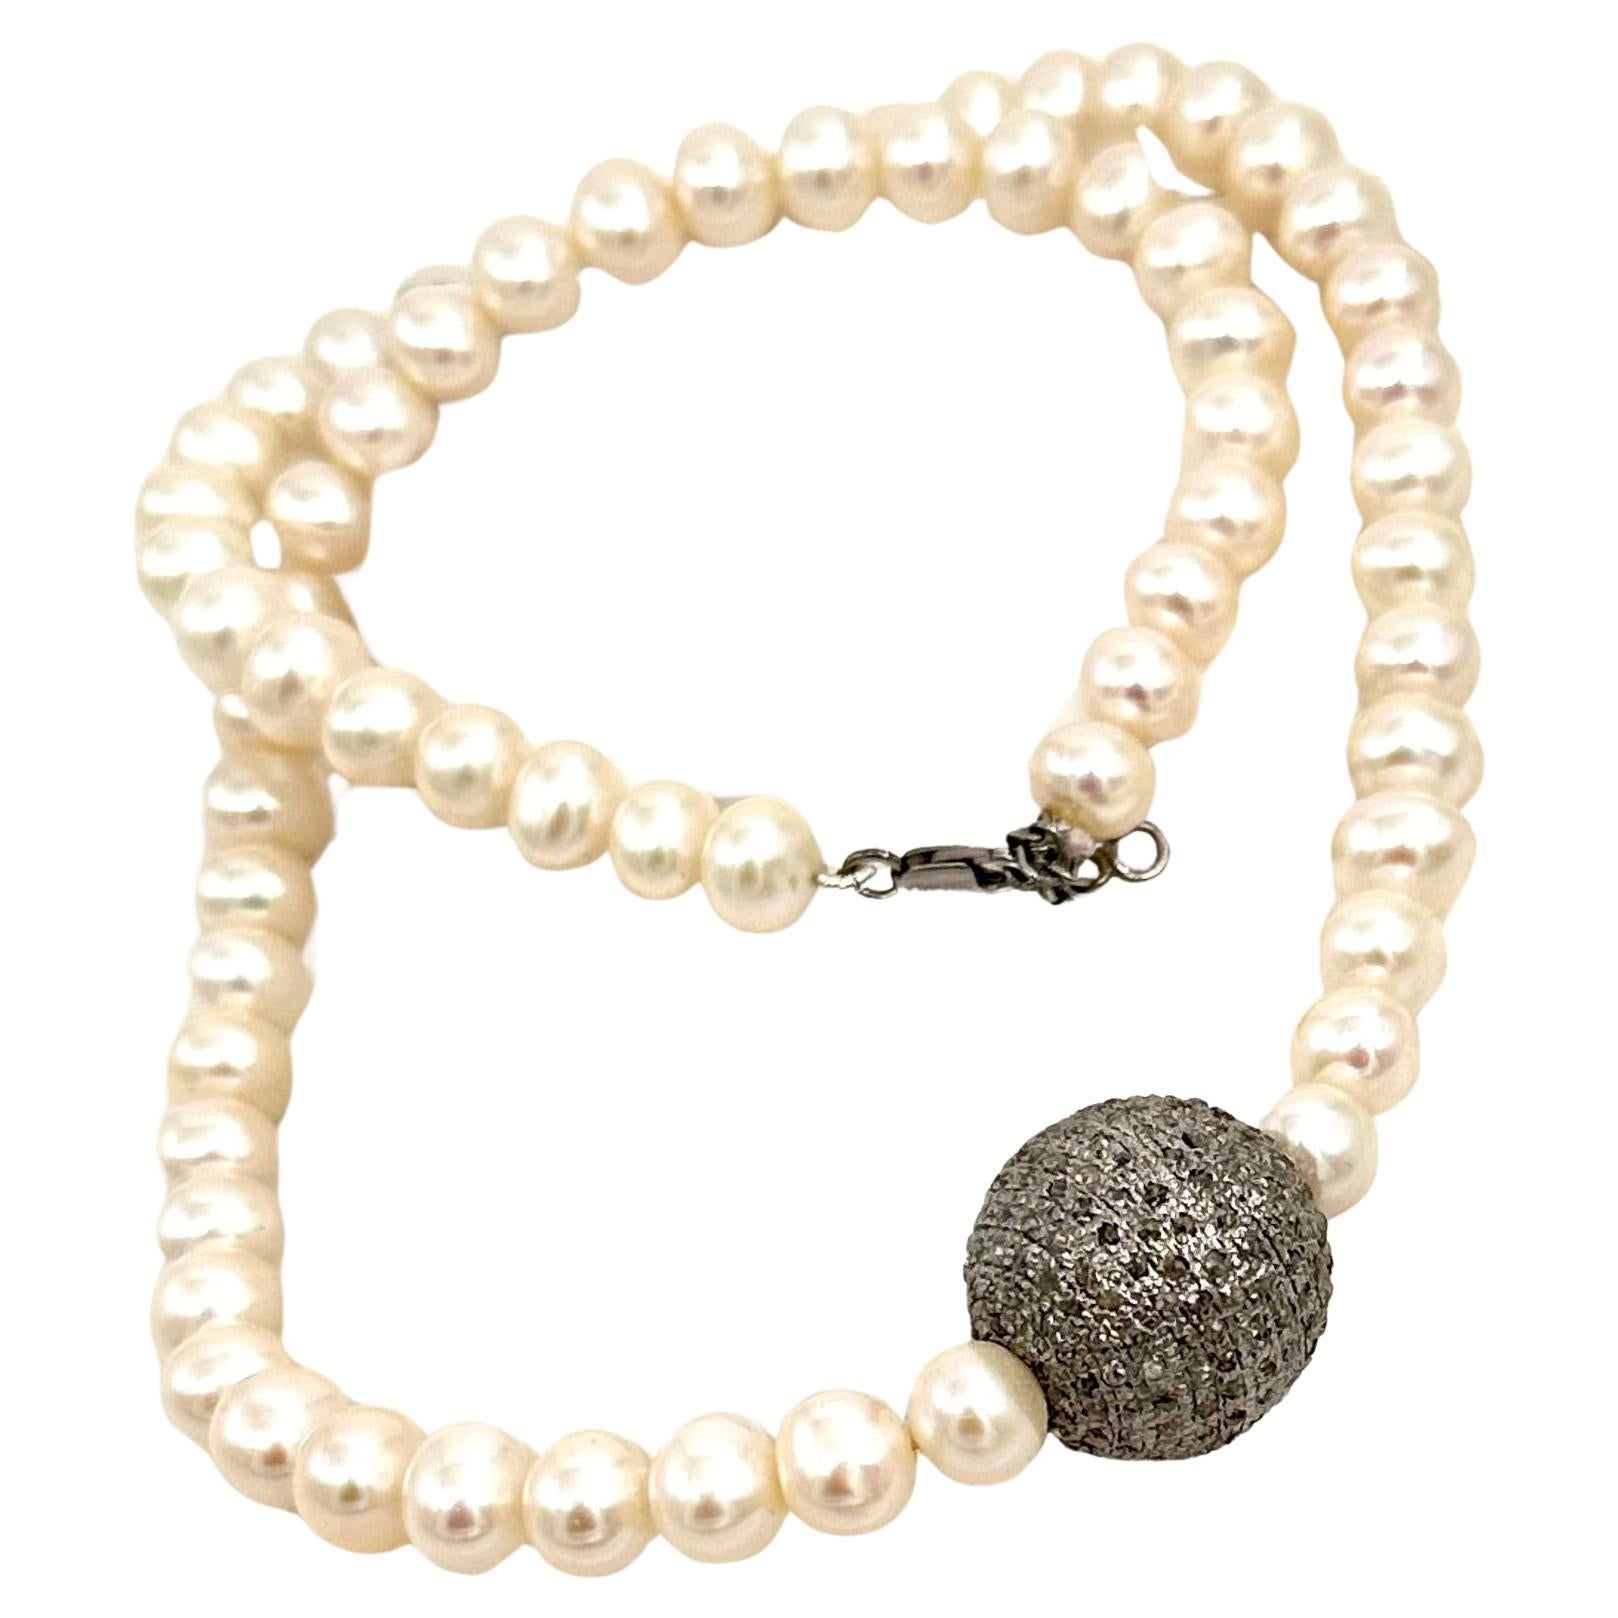 White button Pearl rose cut diamond bead sterling silver necklace For Sale